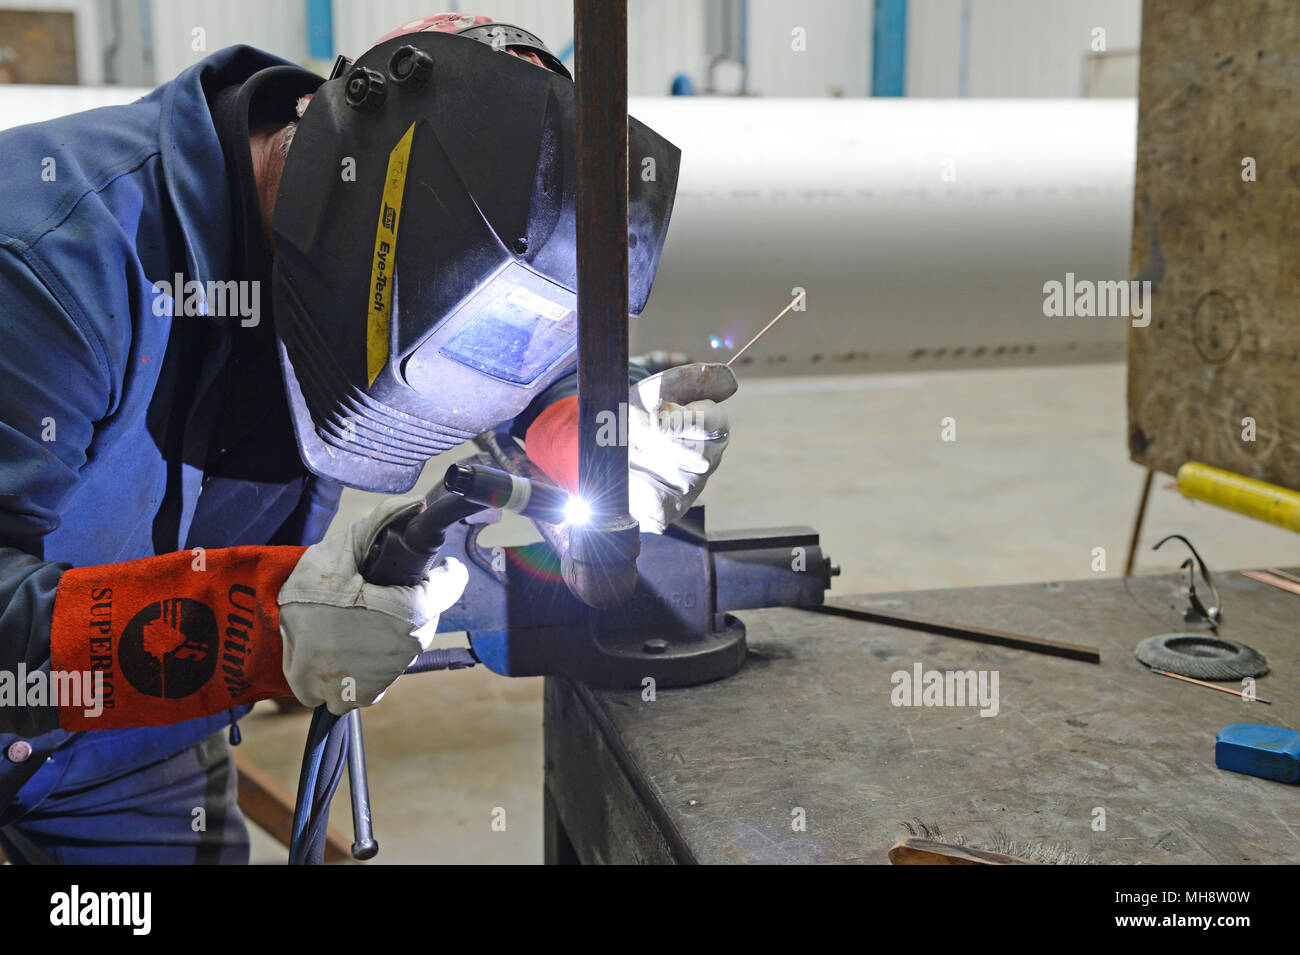 Welder welding pipe together in a fabrication workshop Stock Photo